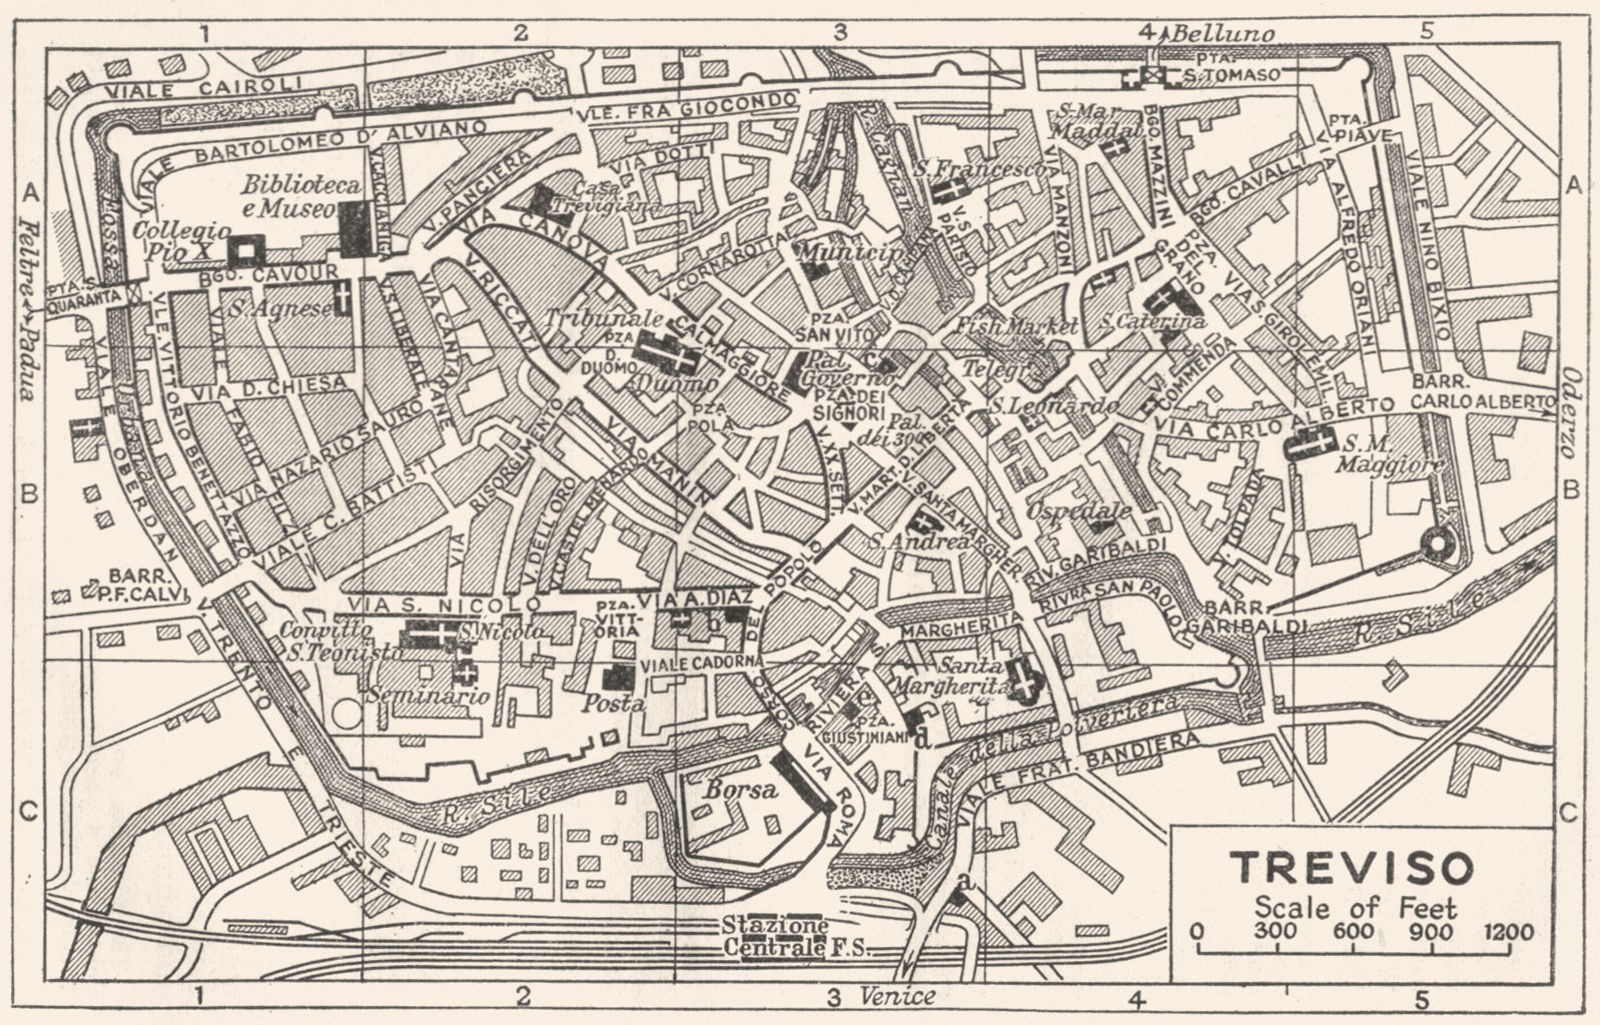 Associate Product TREVISO town/city plan. Italy 1953 old vintage map chart